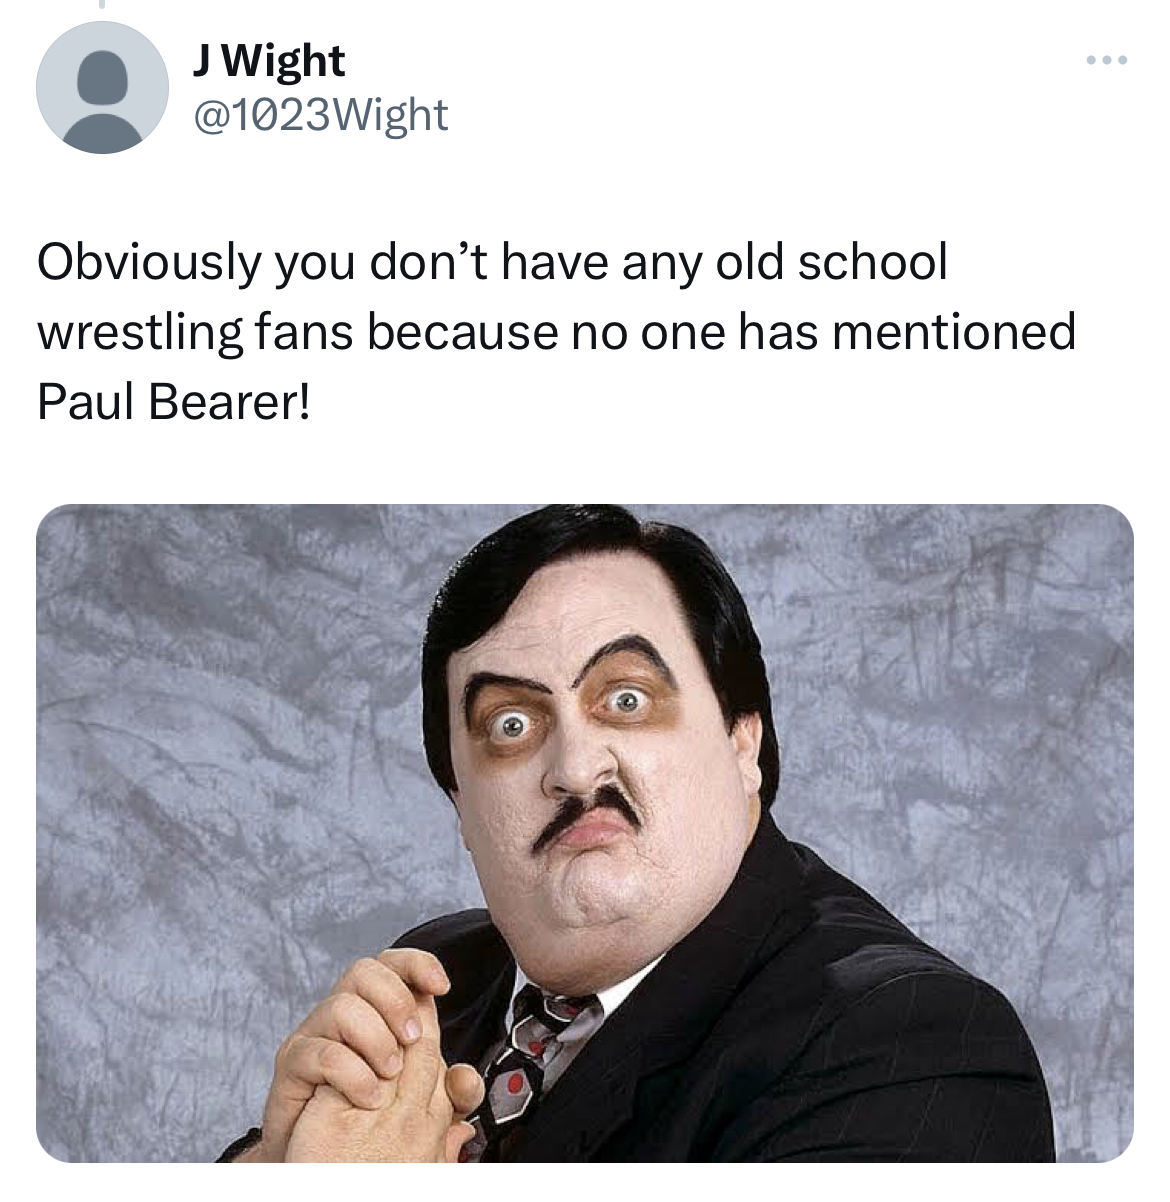 Vince McMahon Mustache memes - paul bearer - J Wight Obviously you don't have any old school wrestling fans because no one has mentioned Paul Bearer!